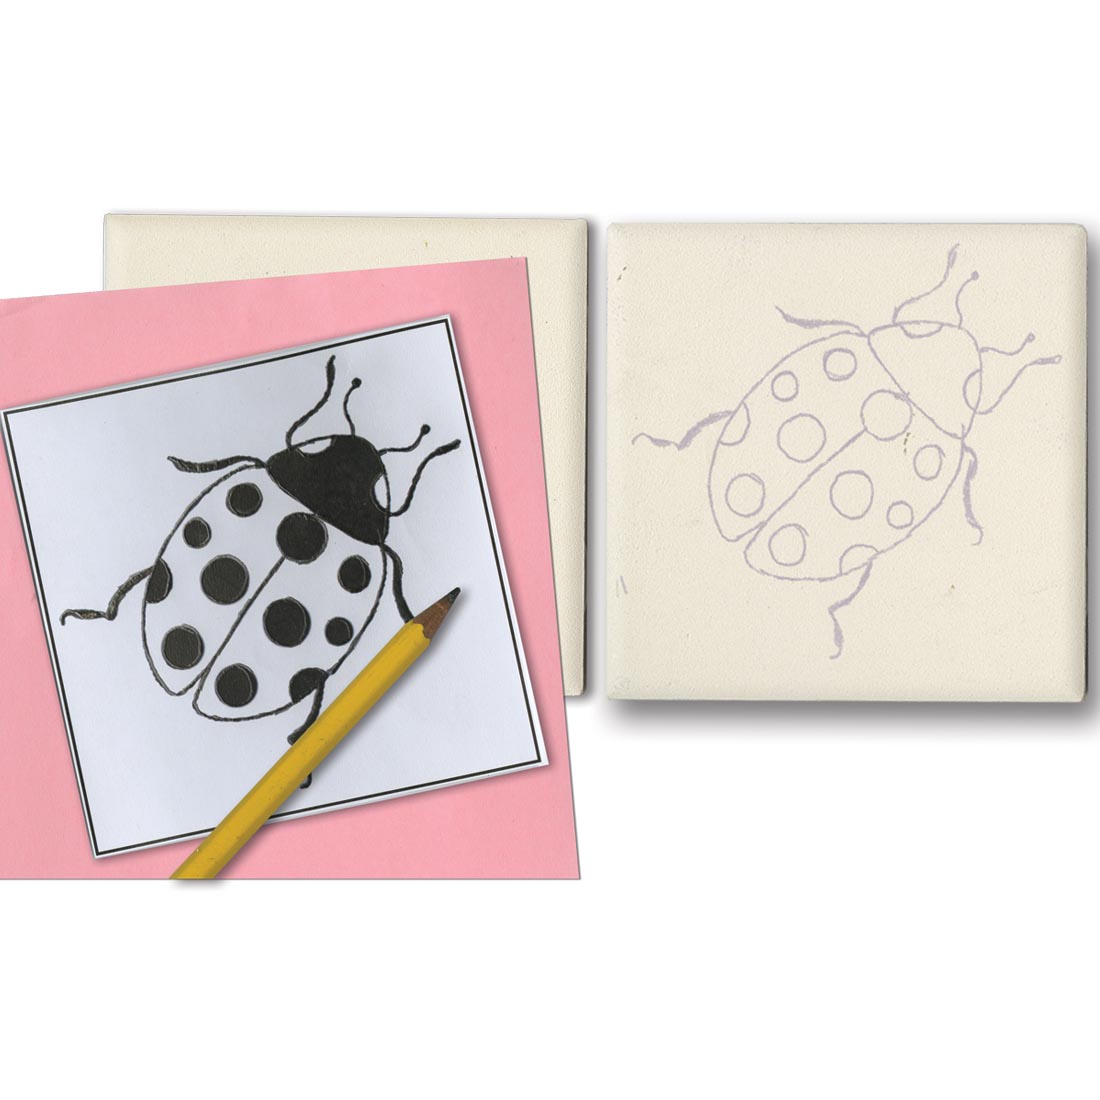 sample ladybug drawn on a tile using Mayco Clay Carbon Transfer Paper